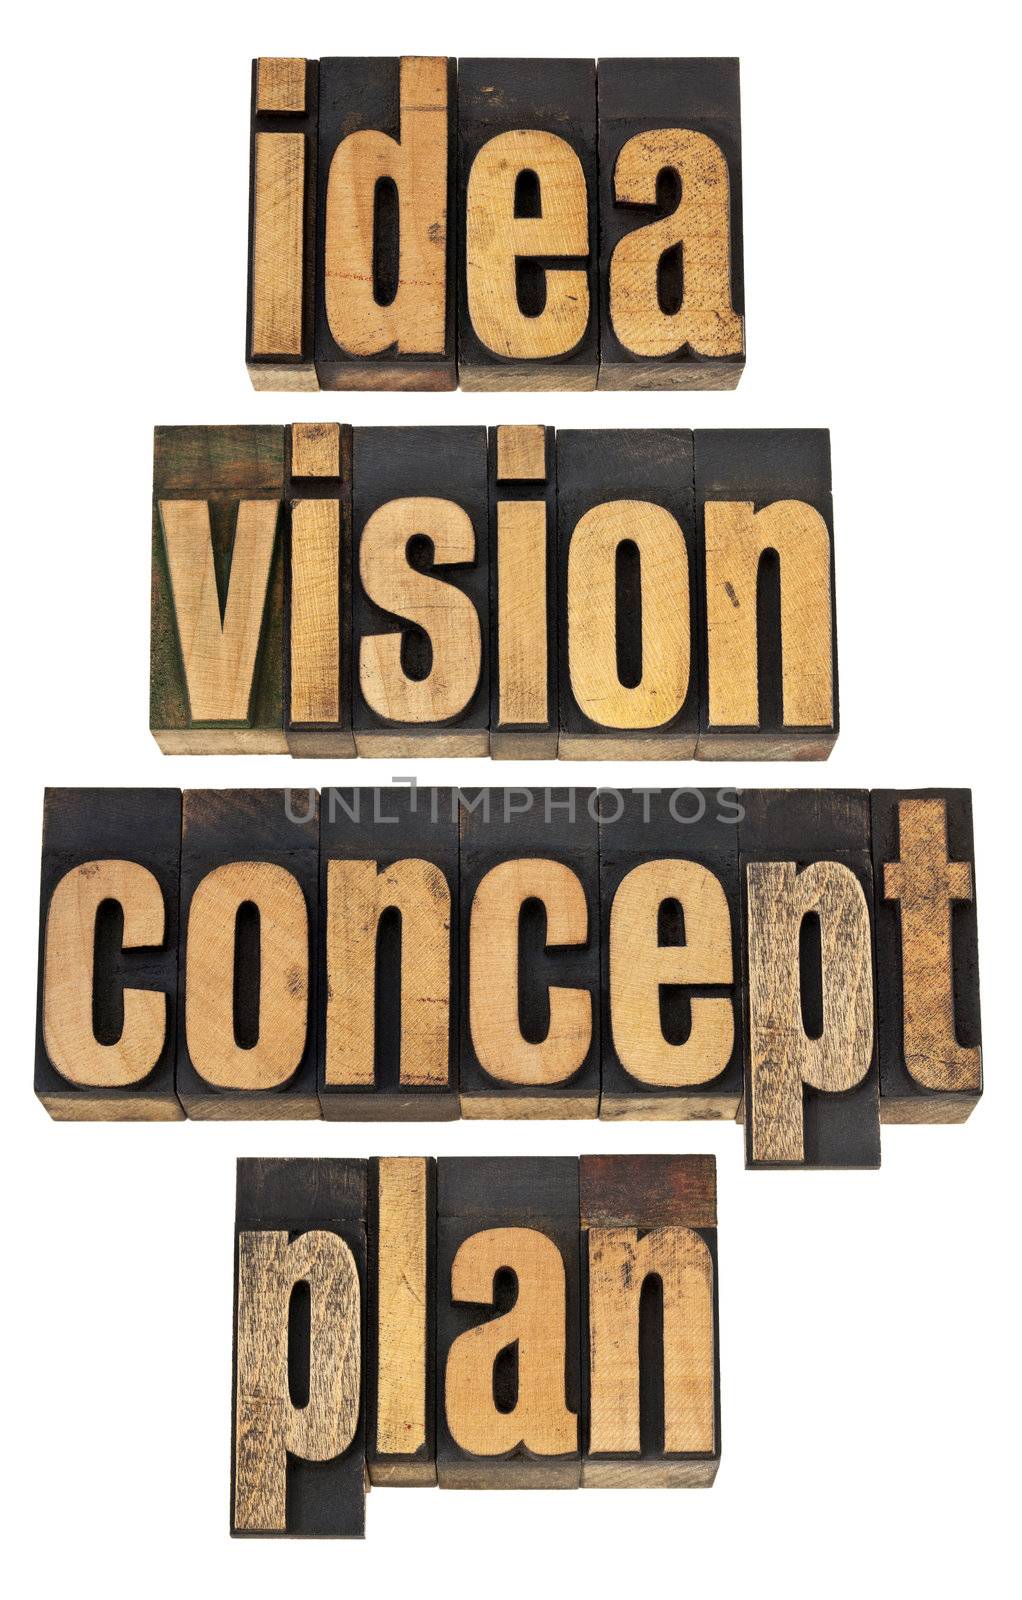 idea, vision, concept and plan - a collage of isolated words in vintage letterpress wood type